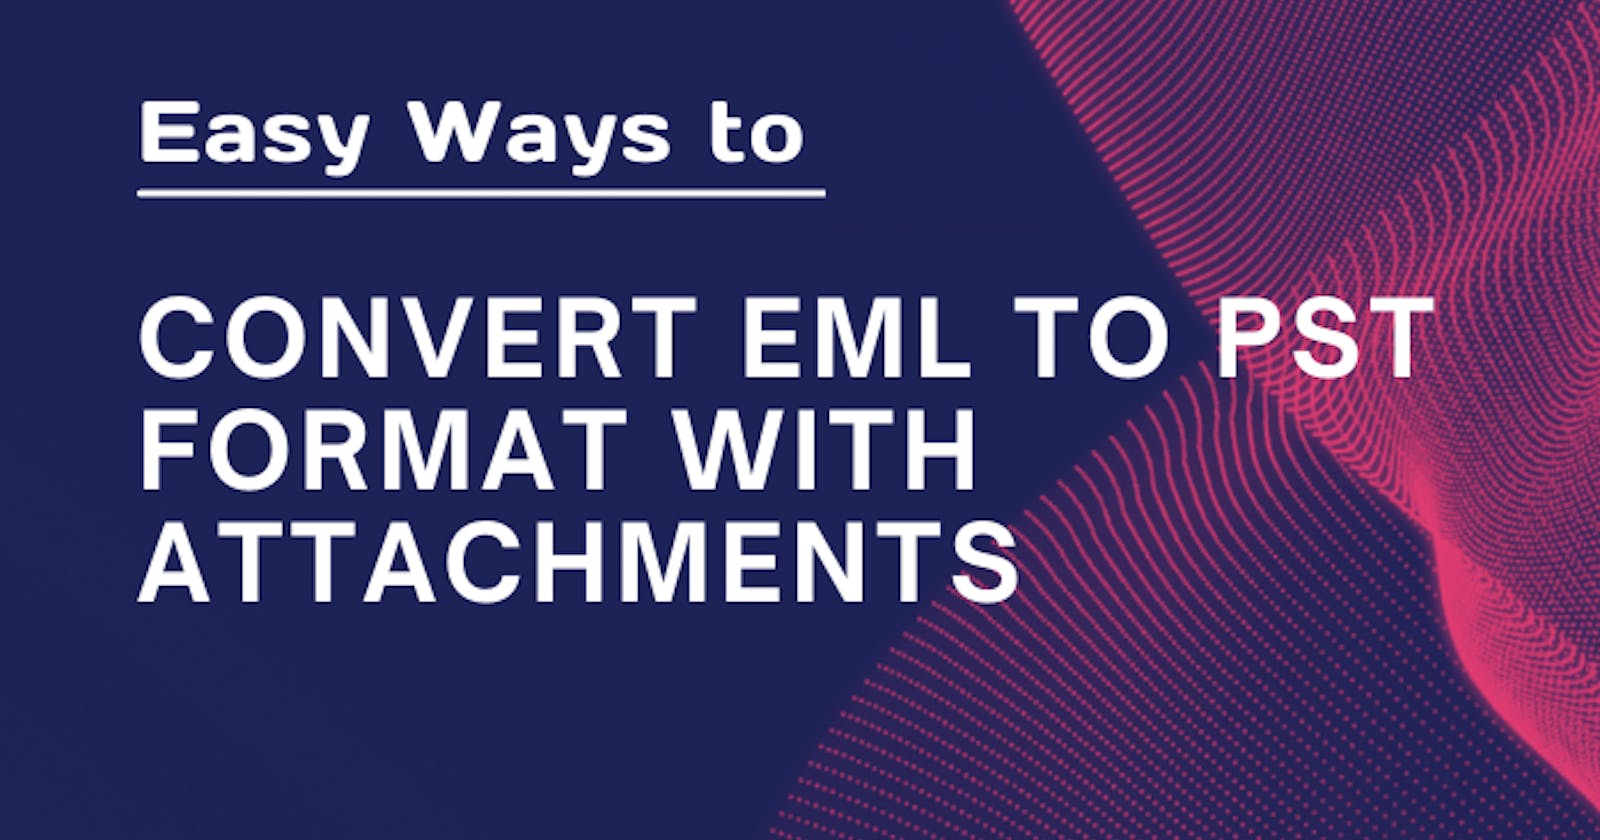 Easy Ways to Convert EML to PST Format with Attachments